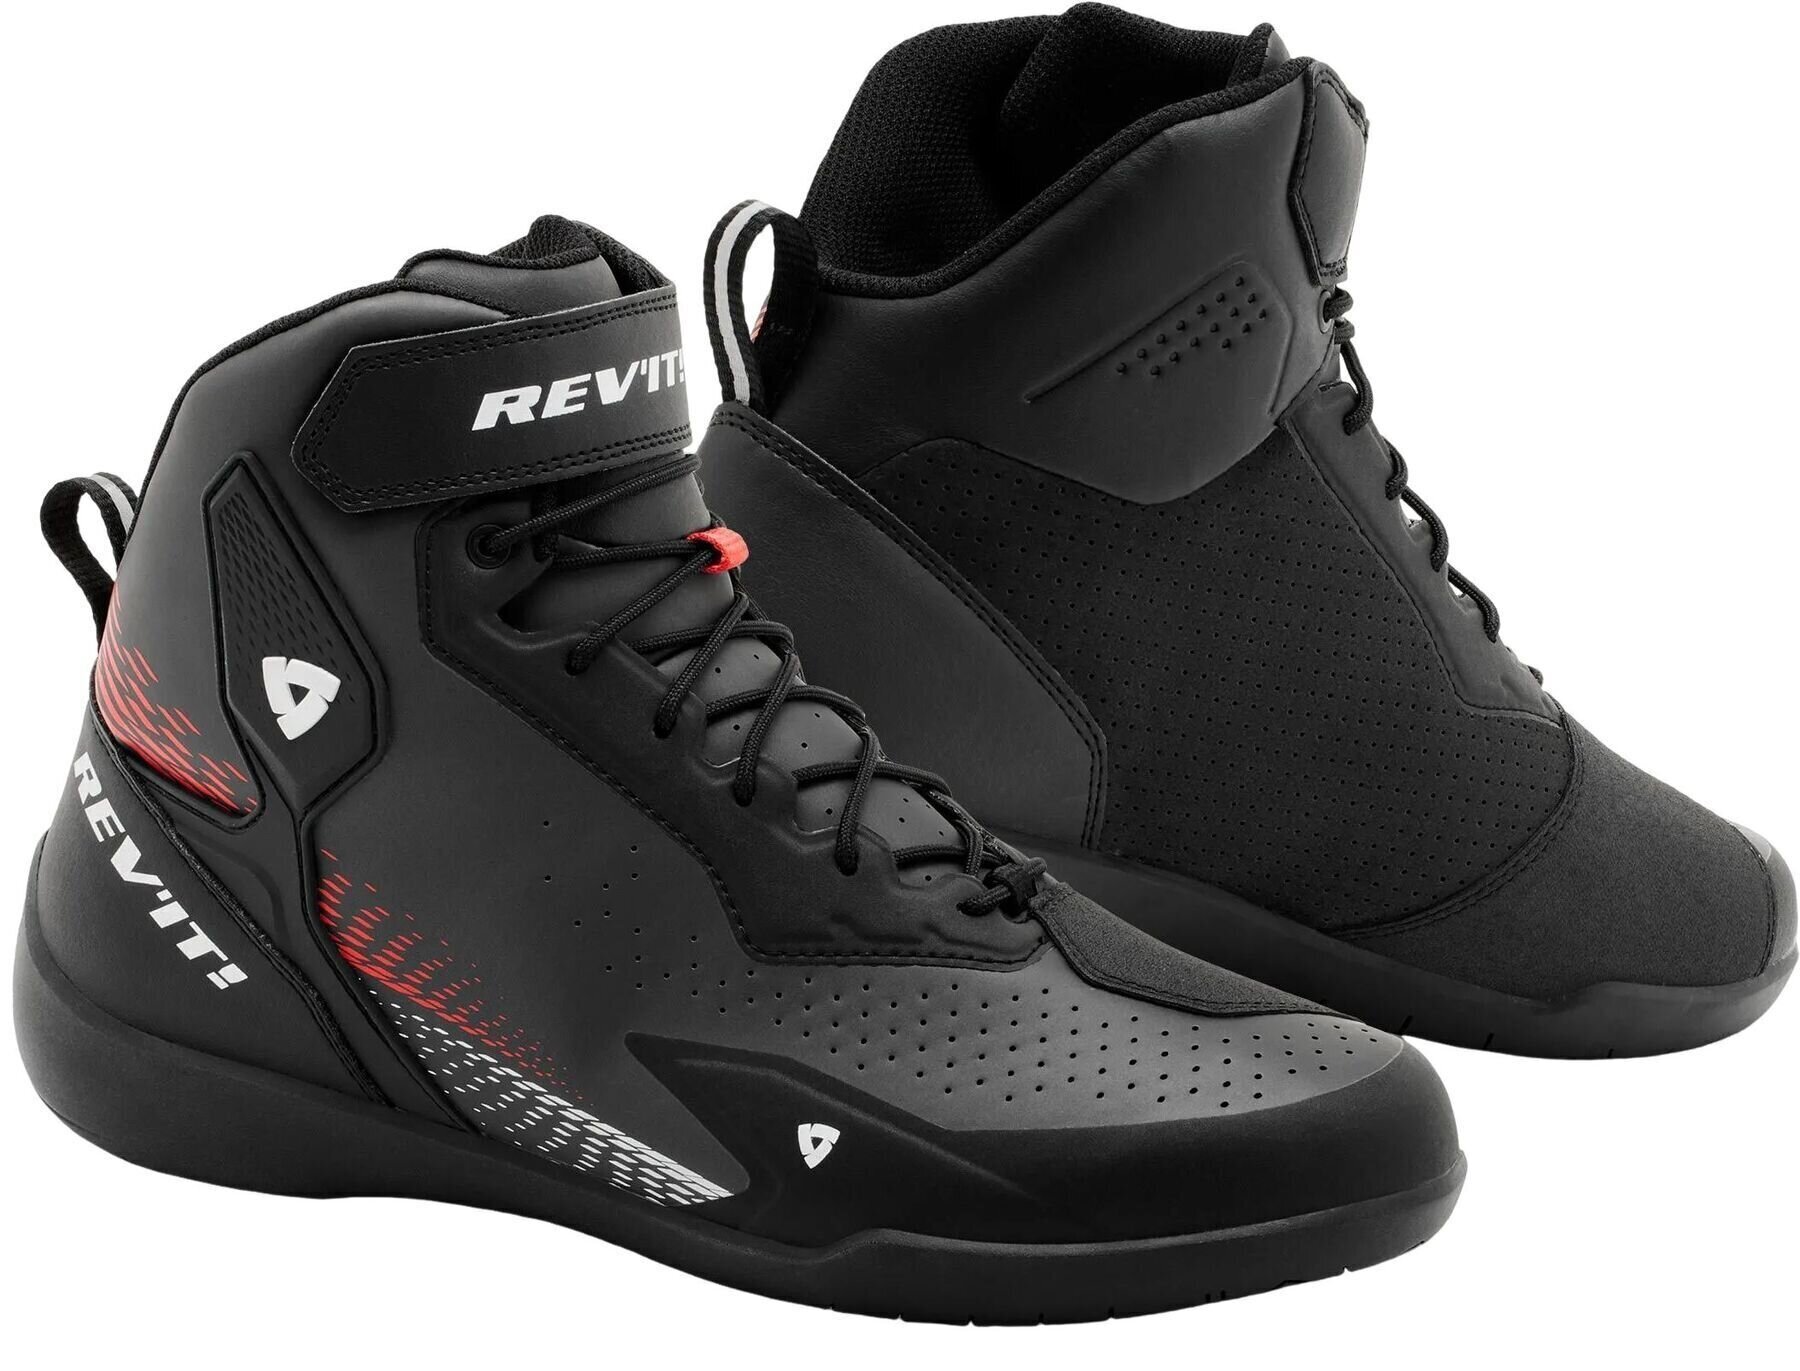 Motorcycle Boots Rev'it! Shoes G-Force 2 Black/Neon Red 45 Motorcycle Boots